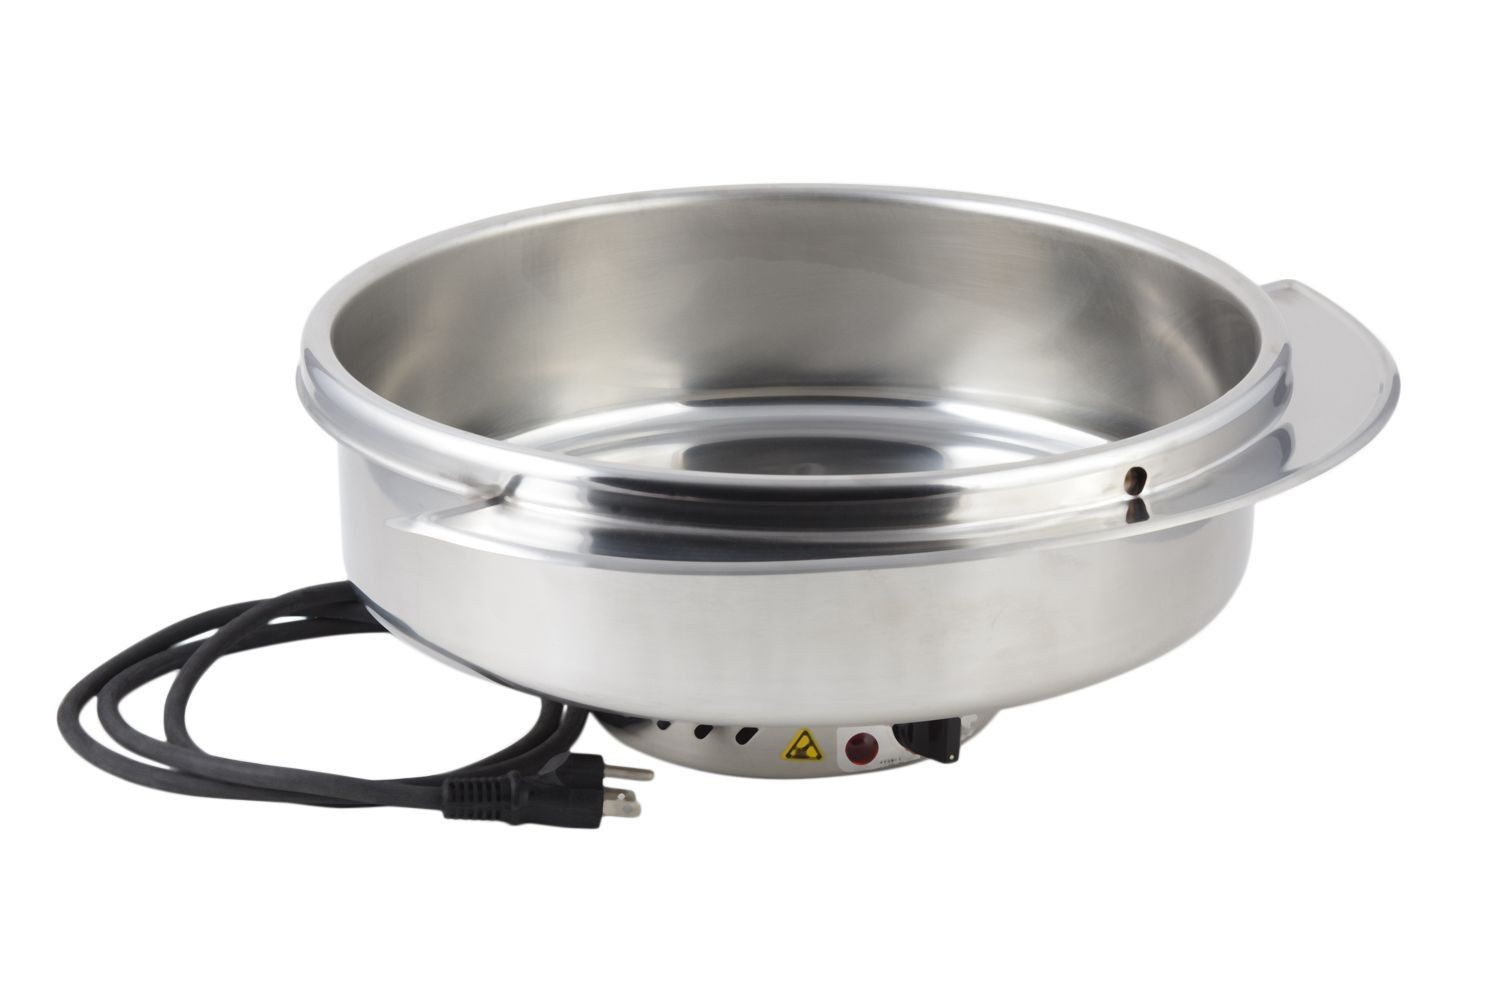 Bon Chef 11002E Electric Dripless Round Water Pan with Attached Heater 12090, 8 Qt.